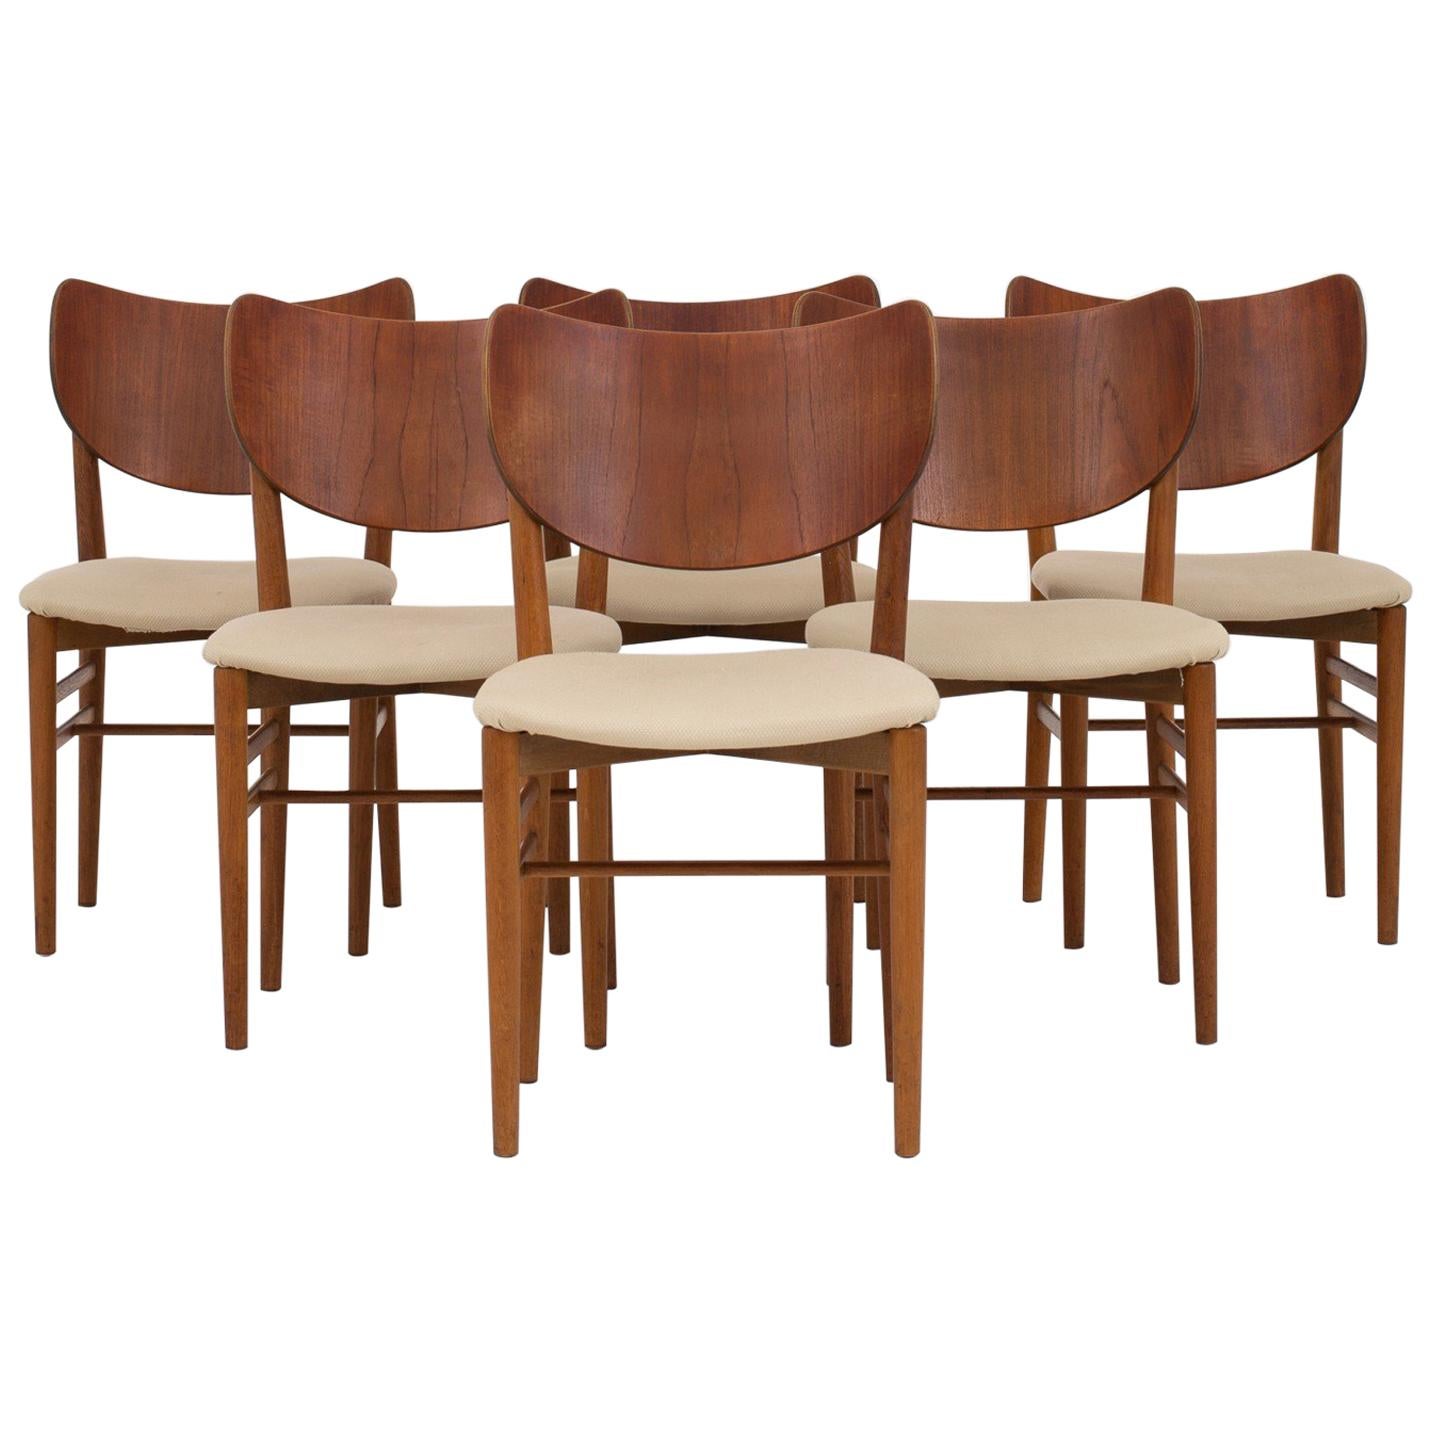 Set of Six Dining Chairs by Nils & Eva Koppel